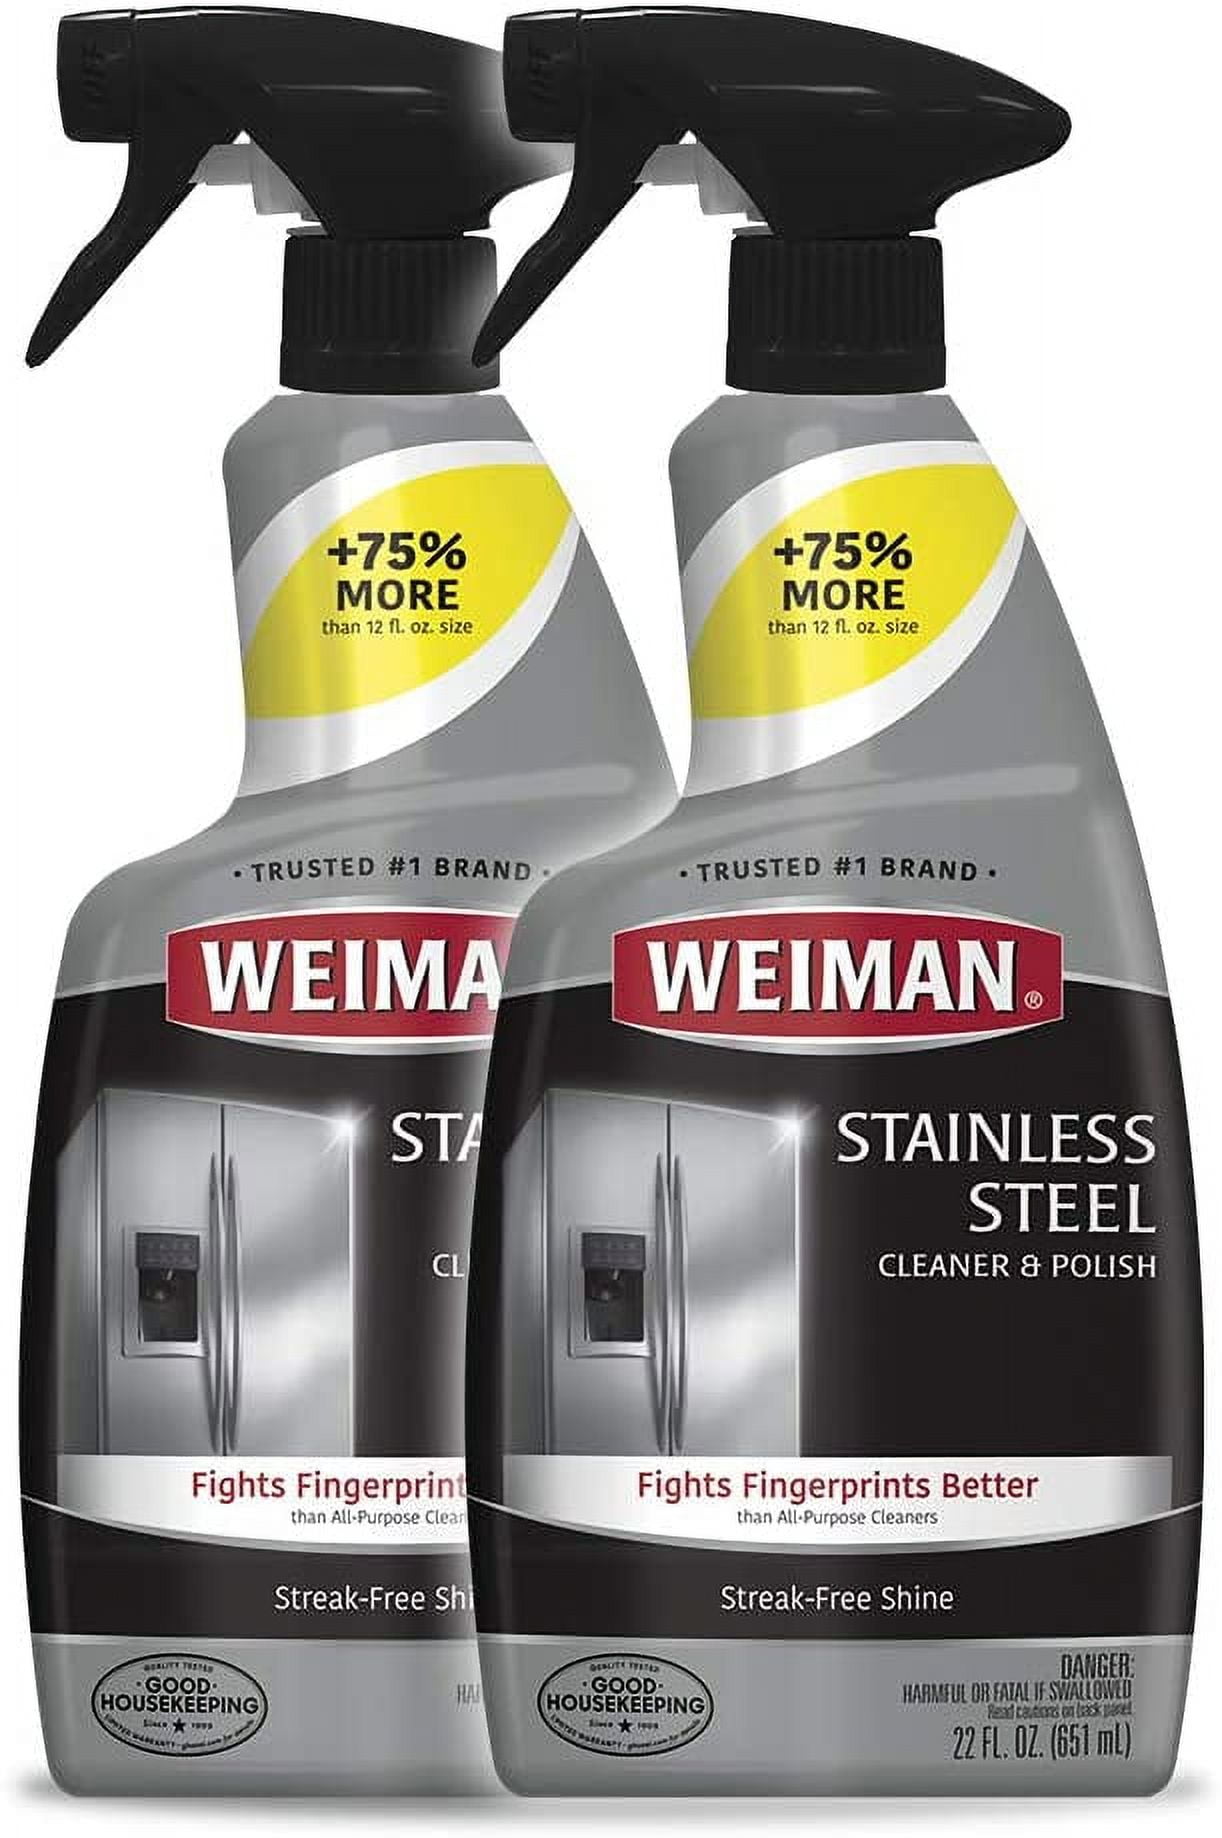 Guardsman Stainless Steel Cleaner & Polish